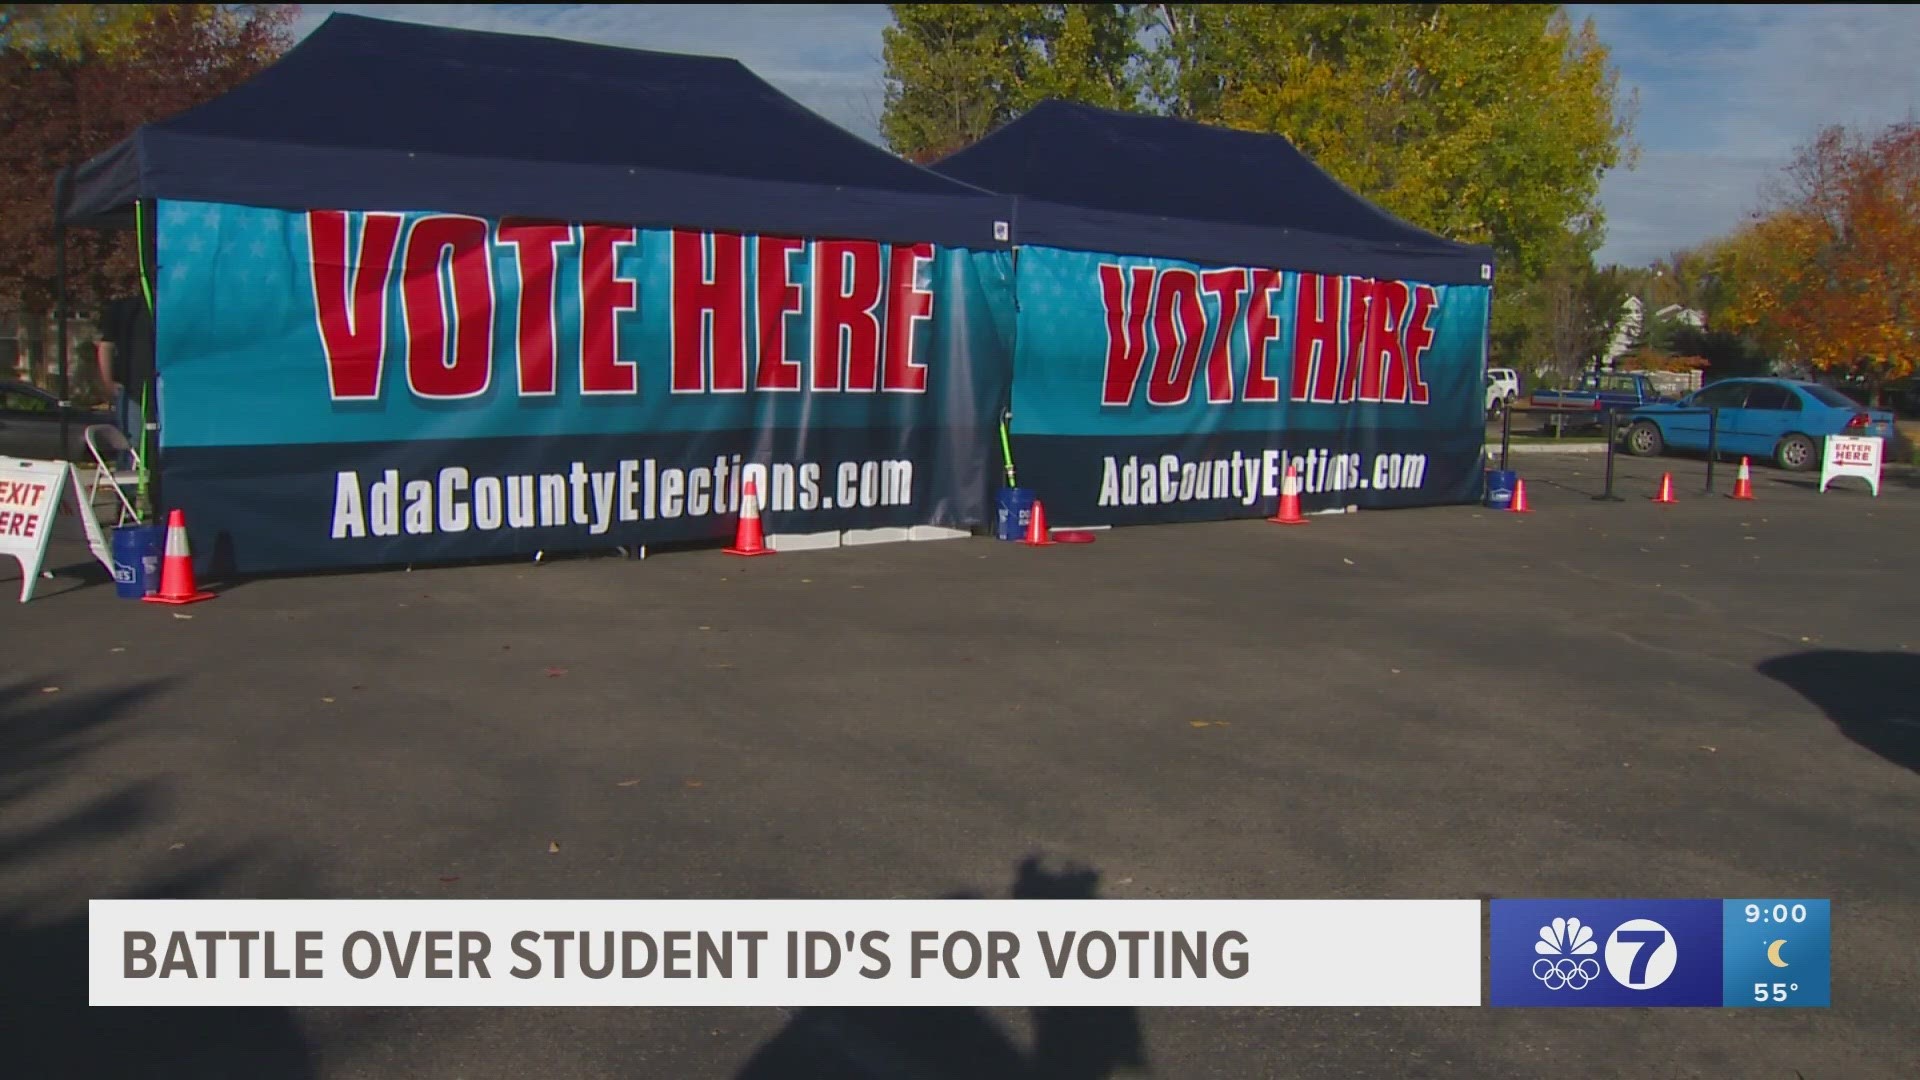 Opposers of recent voting laws say it is unfair for students.